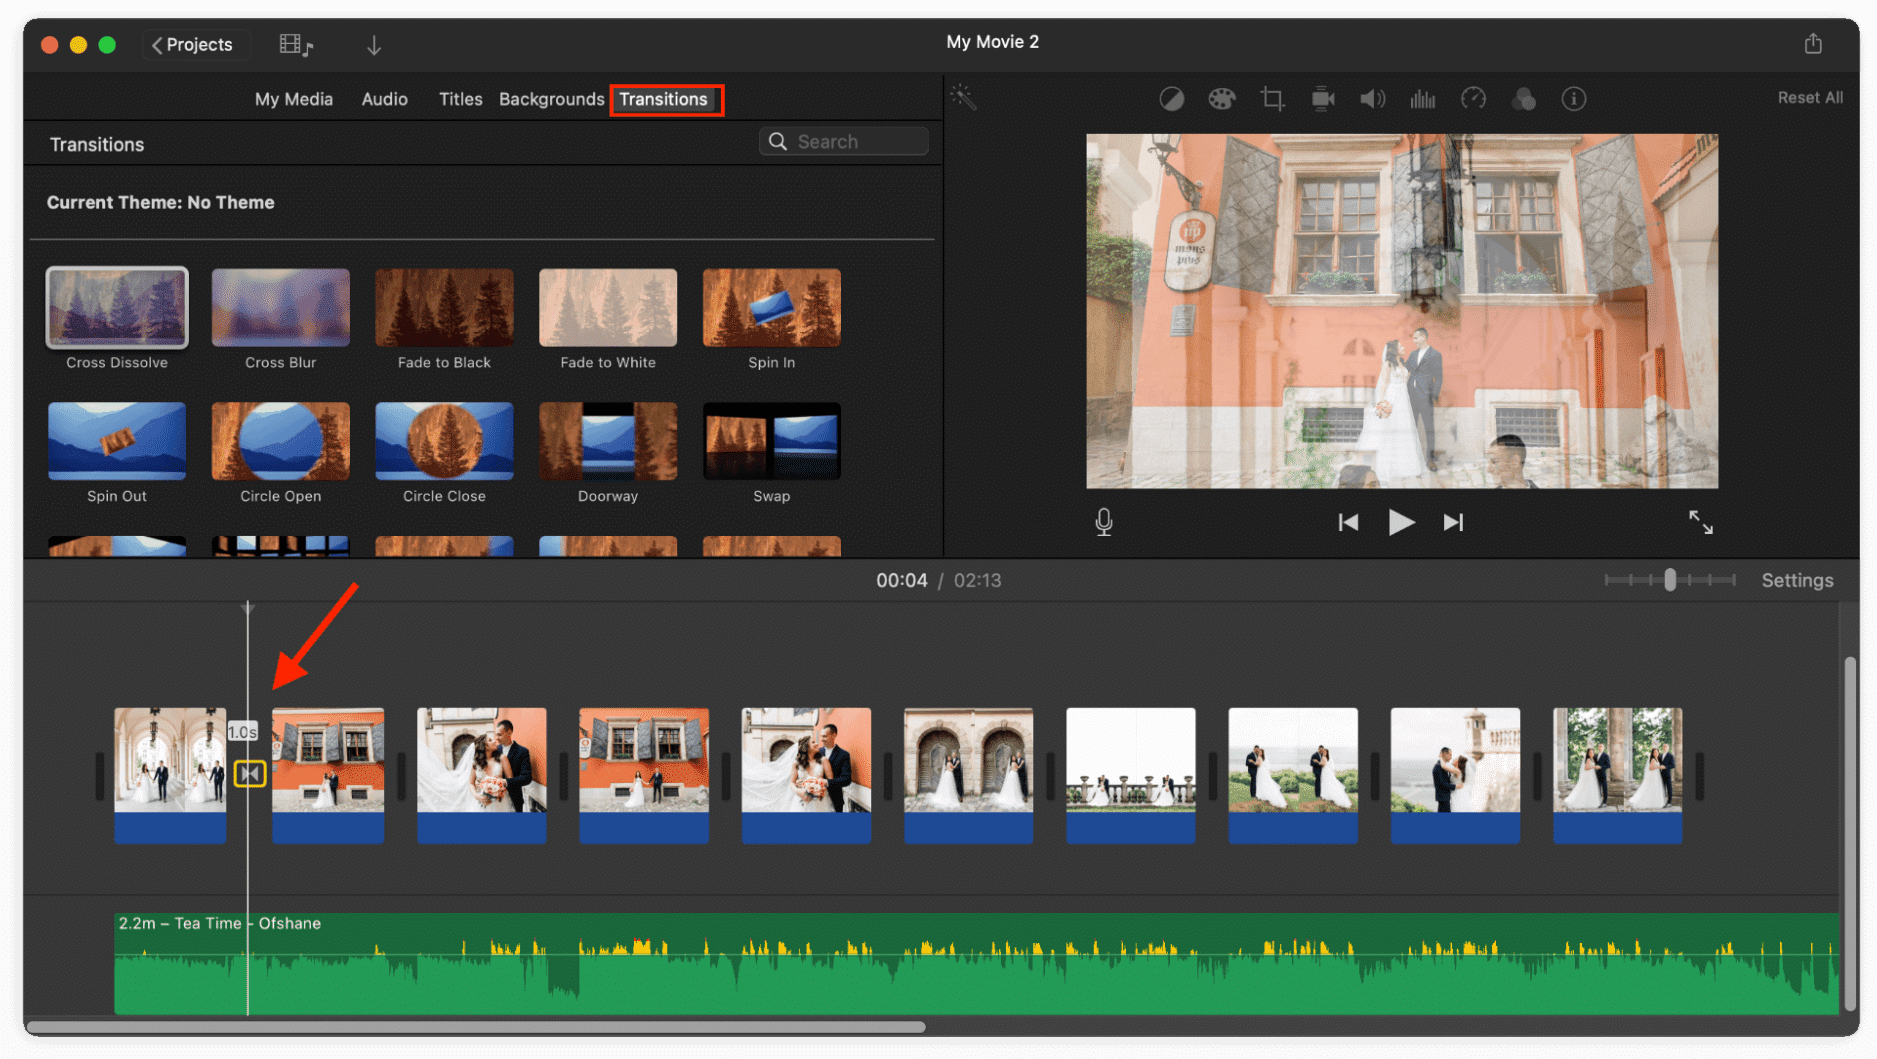 Transitions section shown in iMovie window